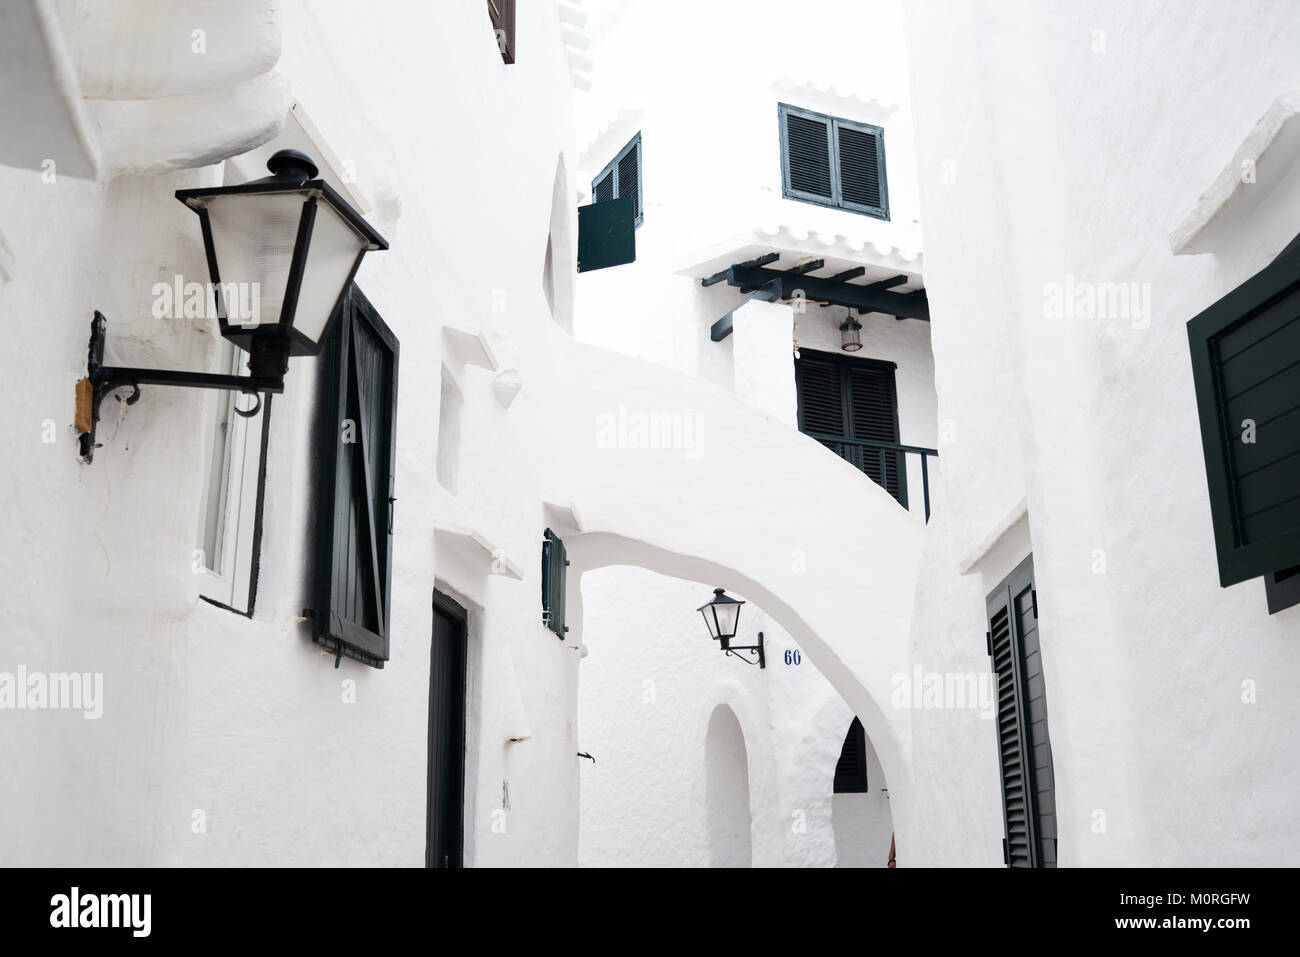 House details in the white traditional small village Binibequer Vell located in Menorca, Balearic Islands, Spain. Stock Photo